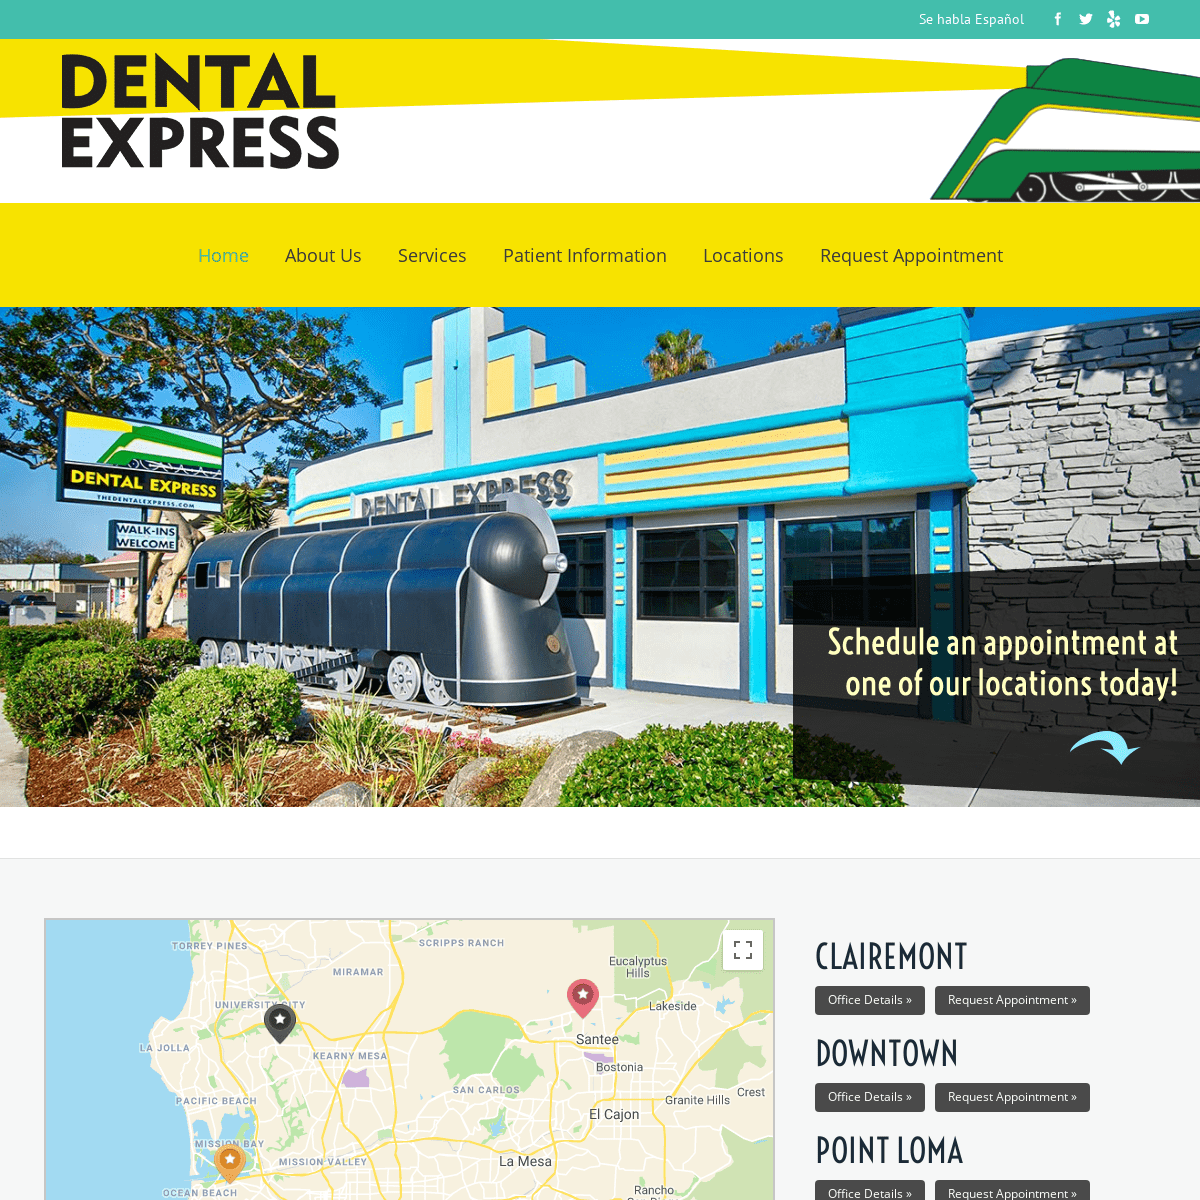 Dentist in San Diego: Easy & Fun for the Whole Family | Dental Express